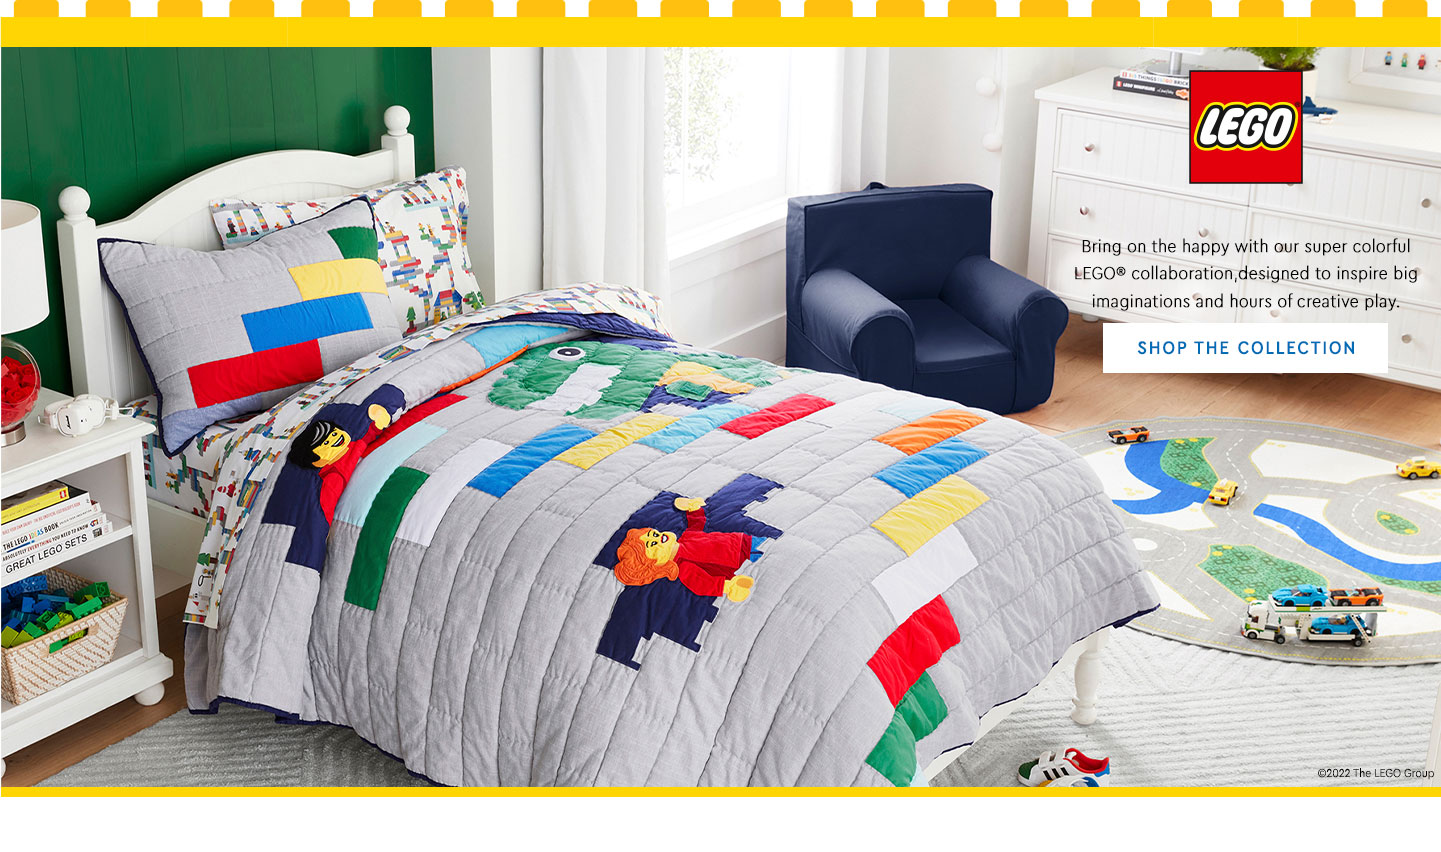 LEGO x Pottery Barn Kids Collection Announced - The Brick Fan